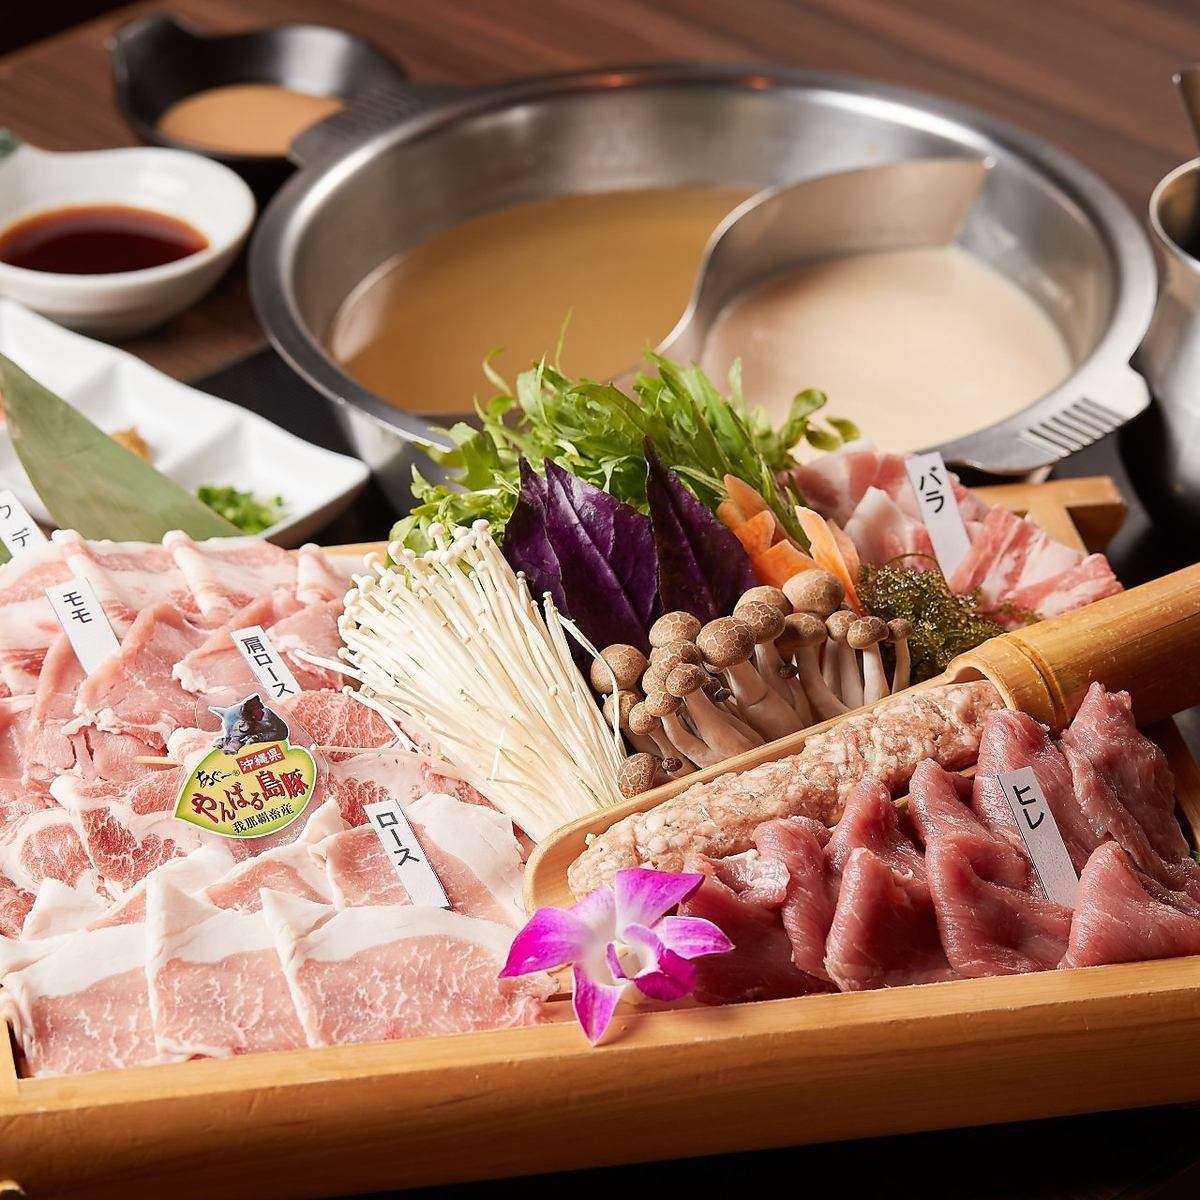 <<All-you-can-eat pork shabu-shabu for 120 minutes>> This is a very popular course!